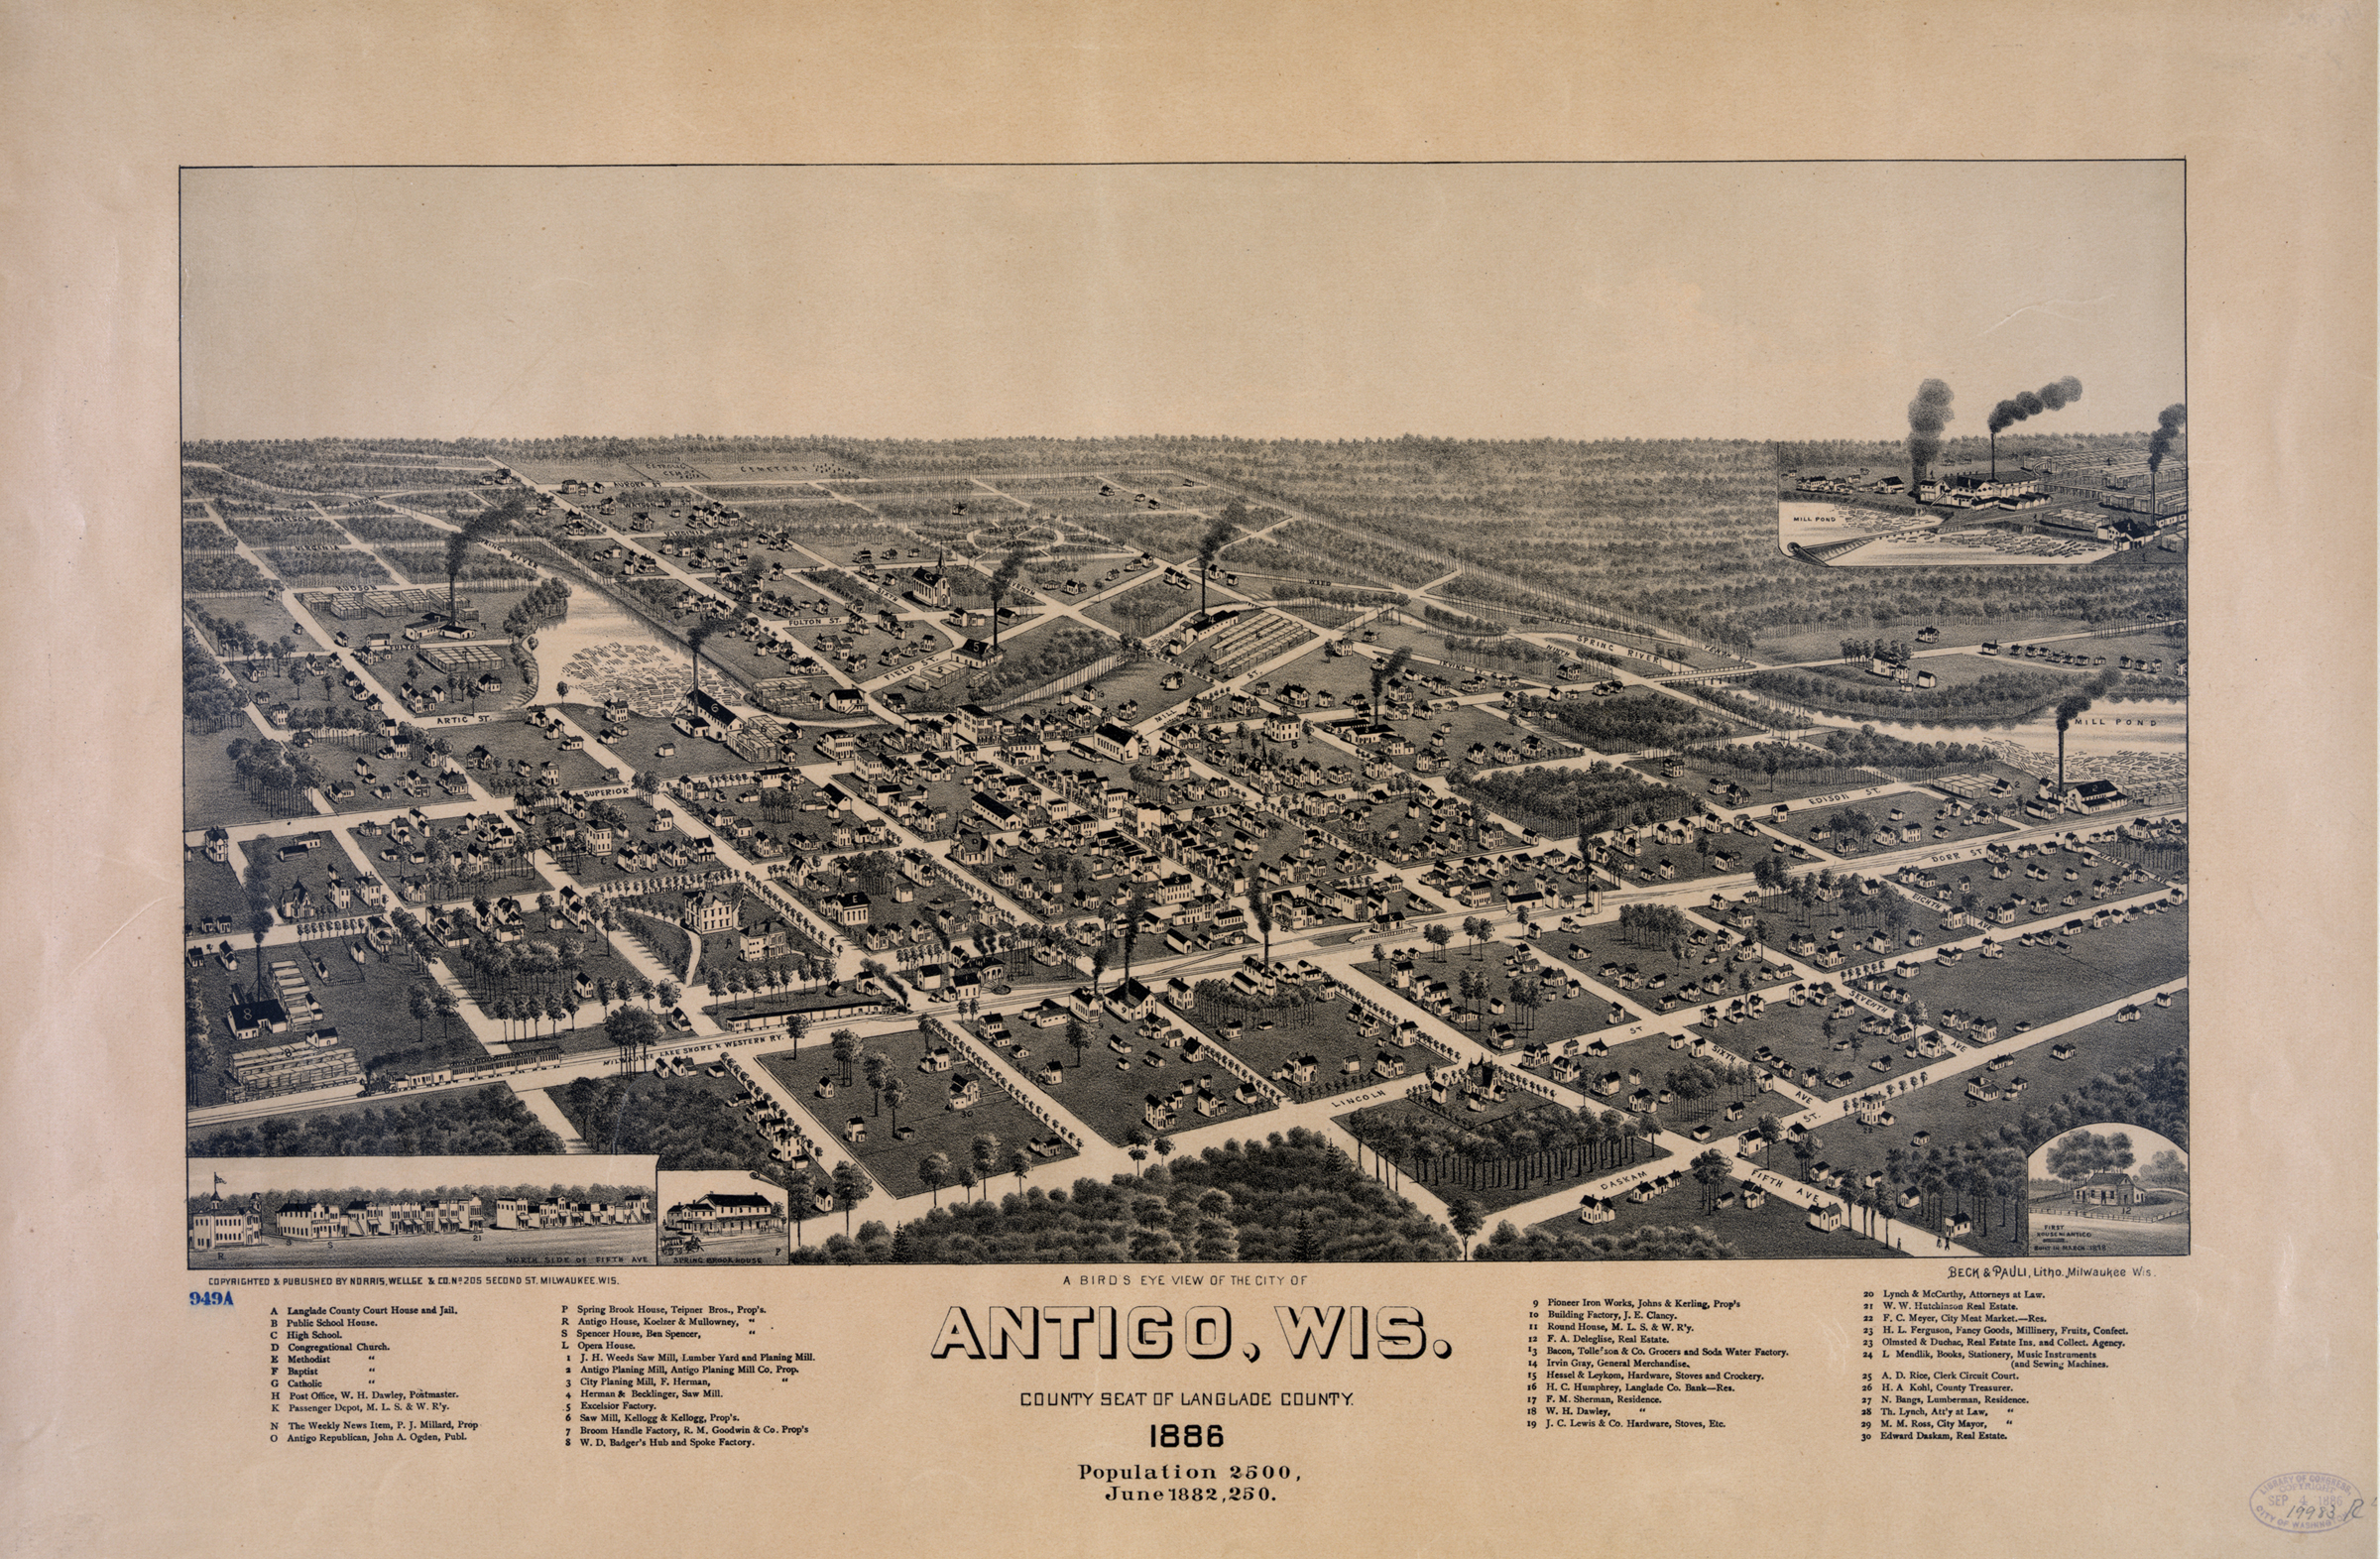 An 1886 bird’s eye view of Antigo, Wisconsin, shows several mills and wood-products manufacturers in town. Click to enlarge.